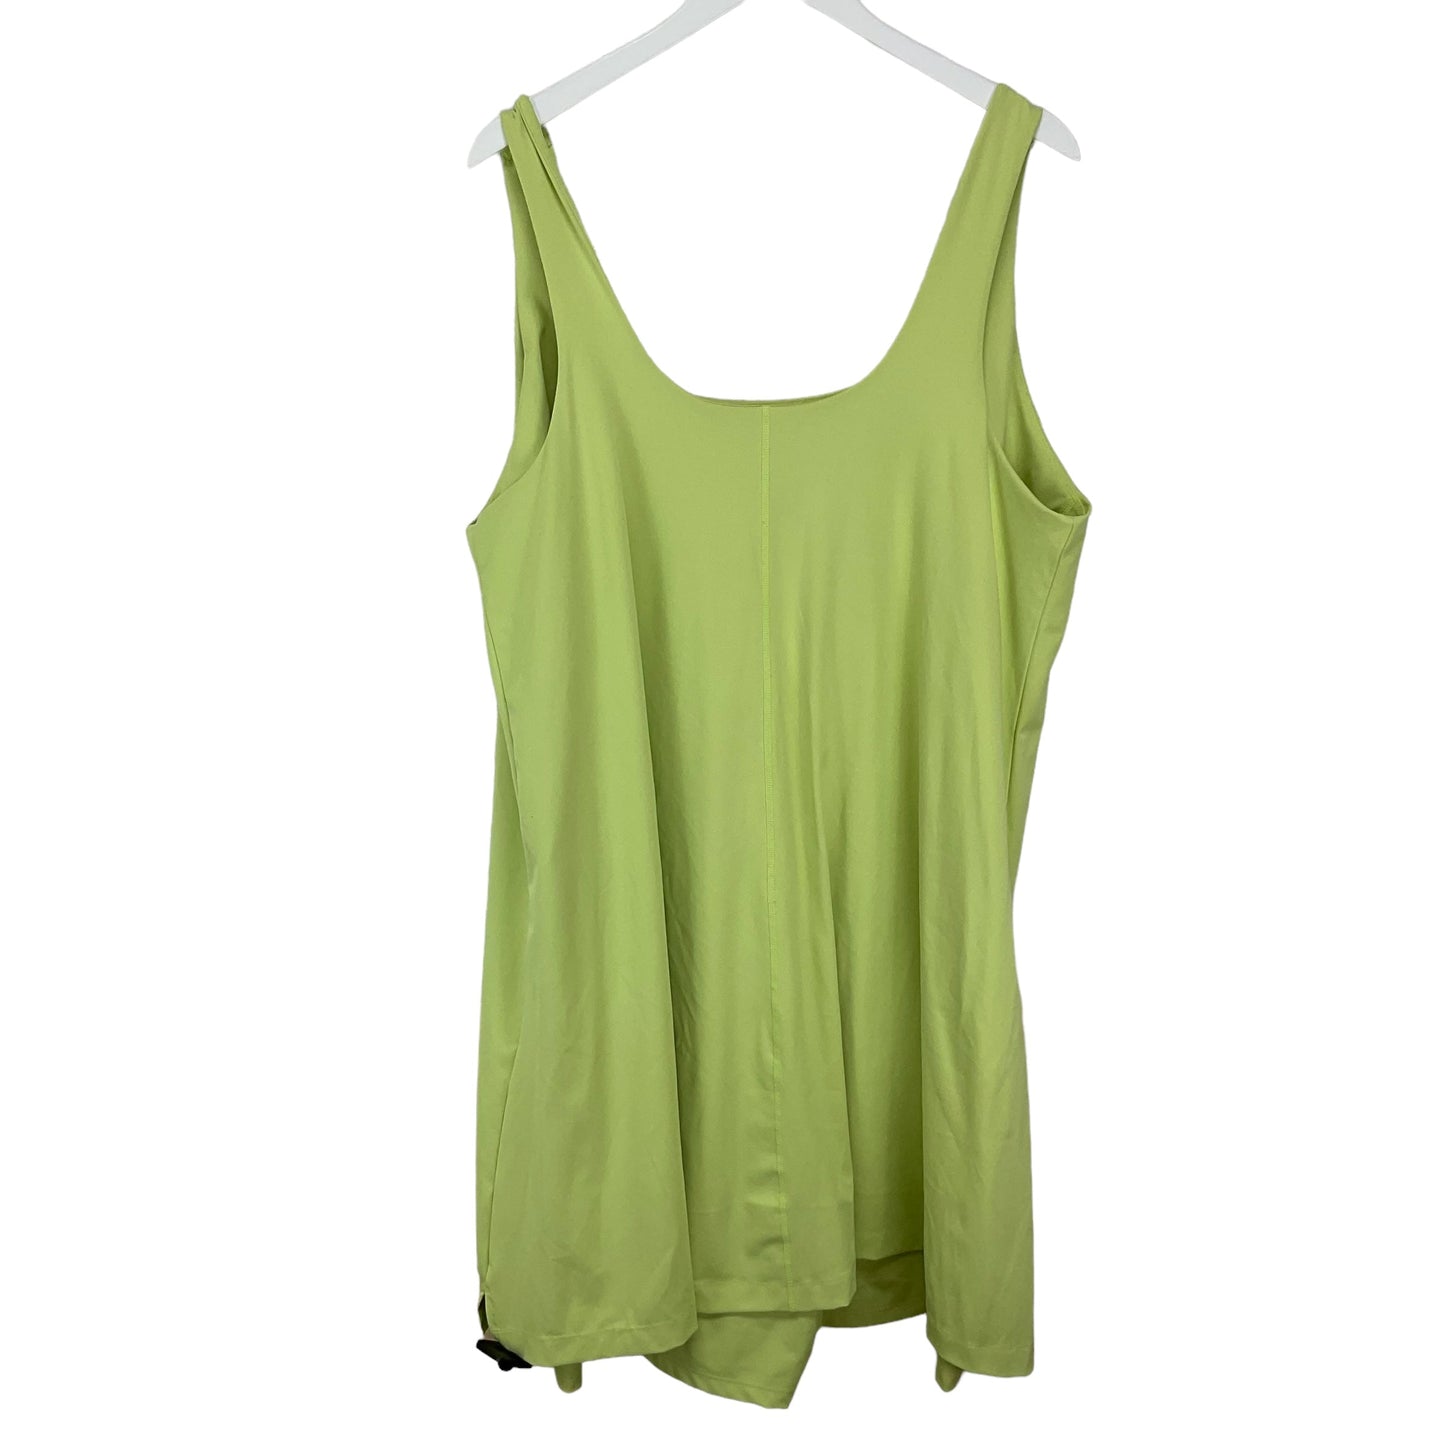 Green Athletic Dress Old Navy, Size 3x